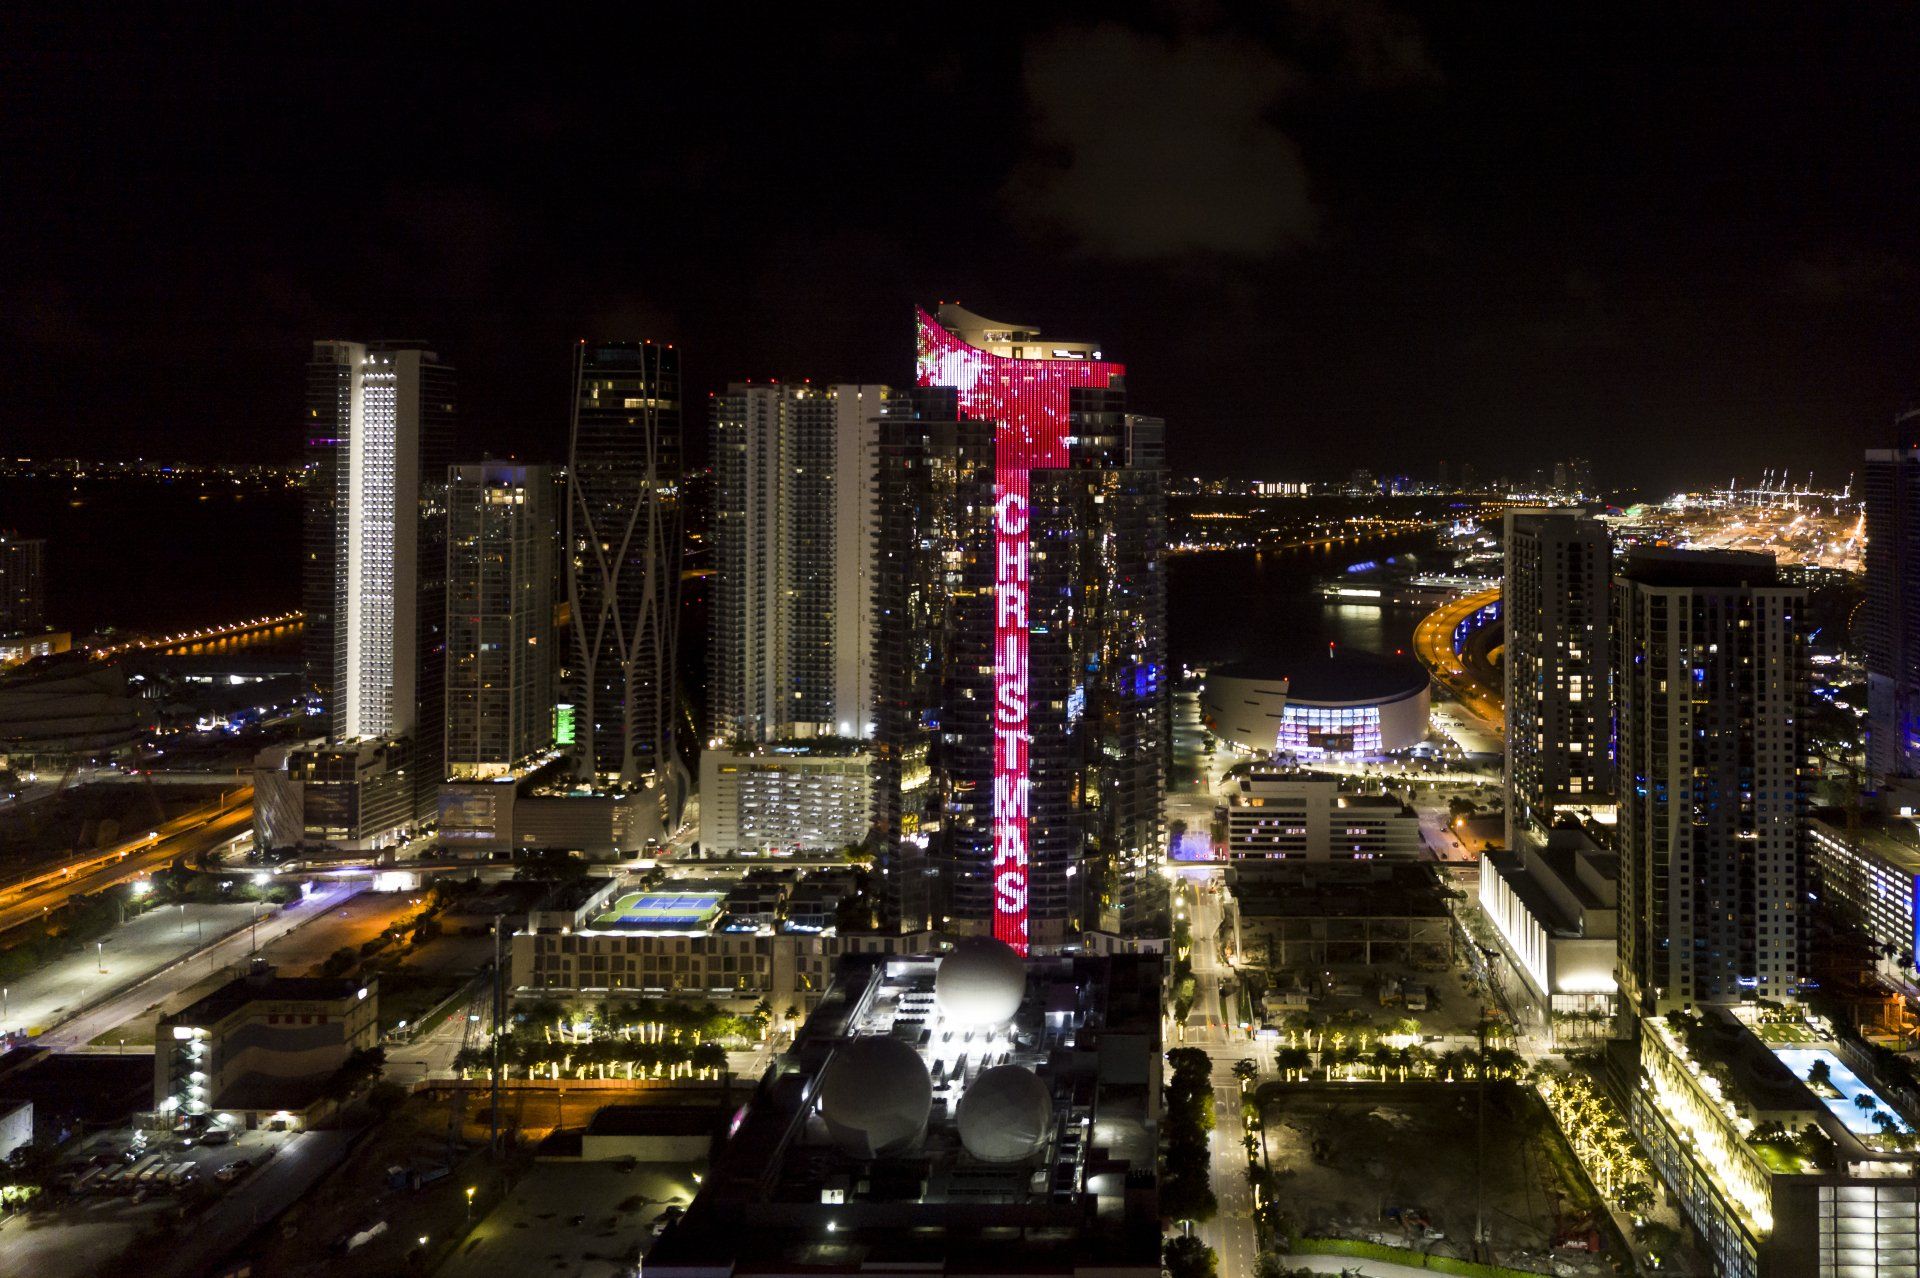 World’s Tallest Digital “Merry Christmas” Candy Cane: world record in Miami, Florida